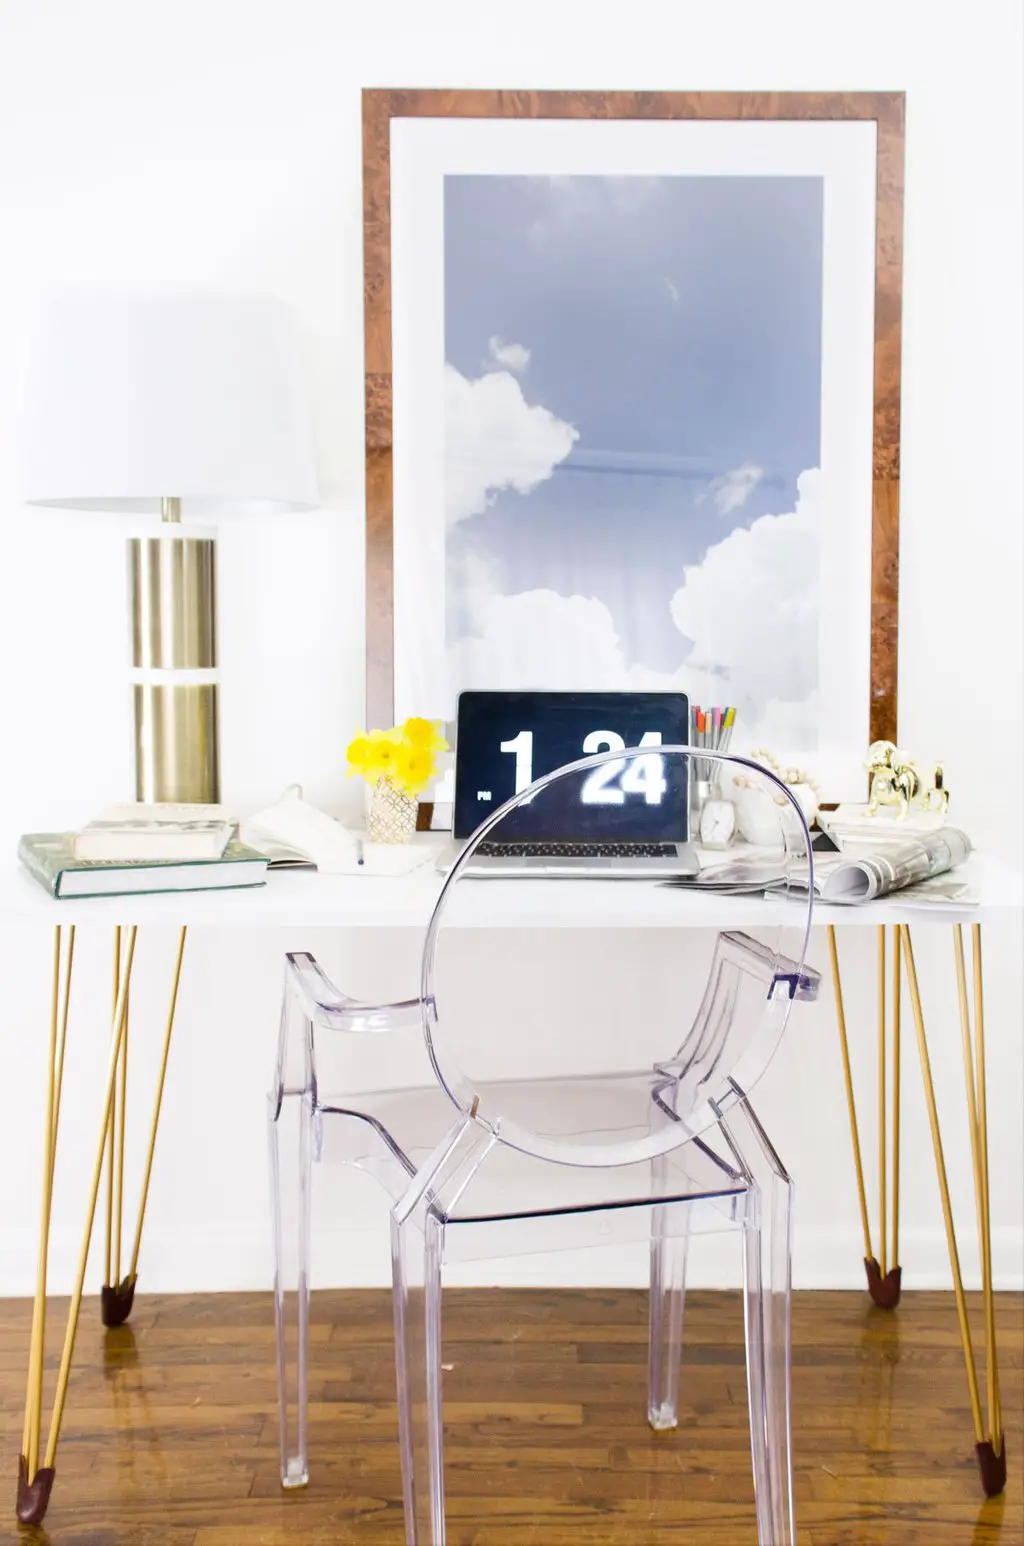 How to make a DIY desk with gold hairpin legs from PrettyPegs on @thouswellblog